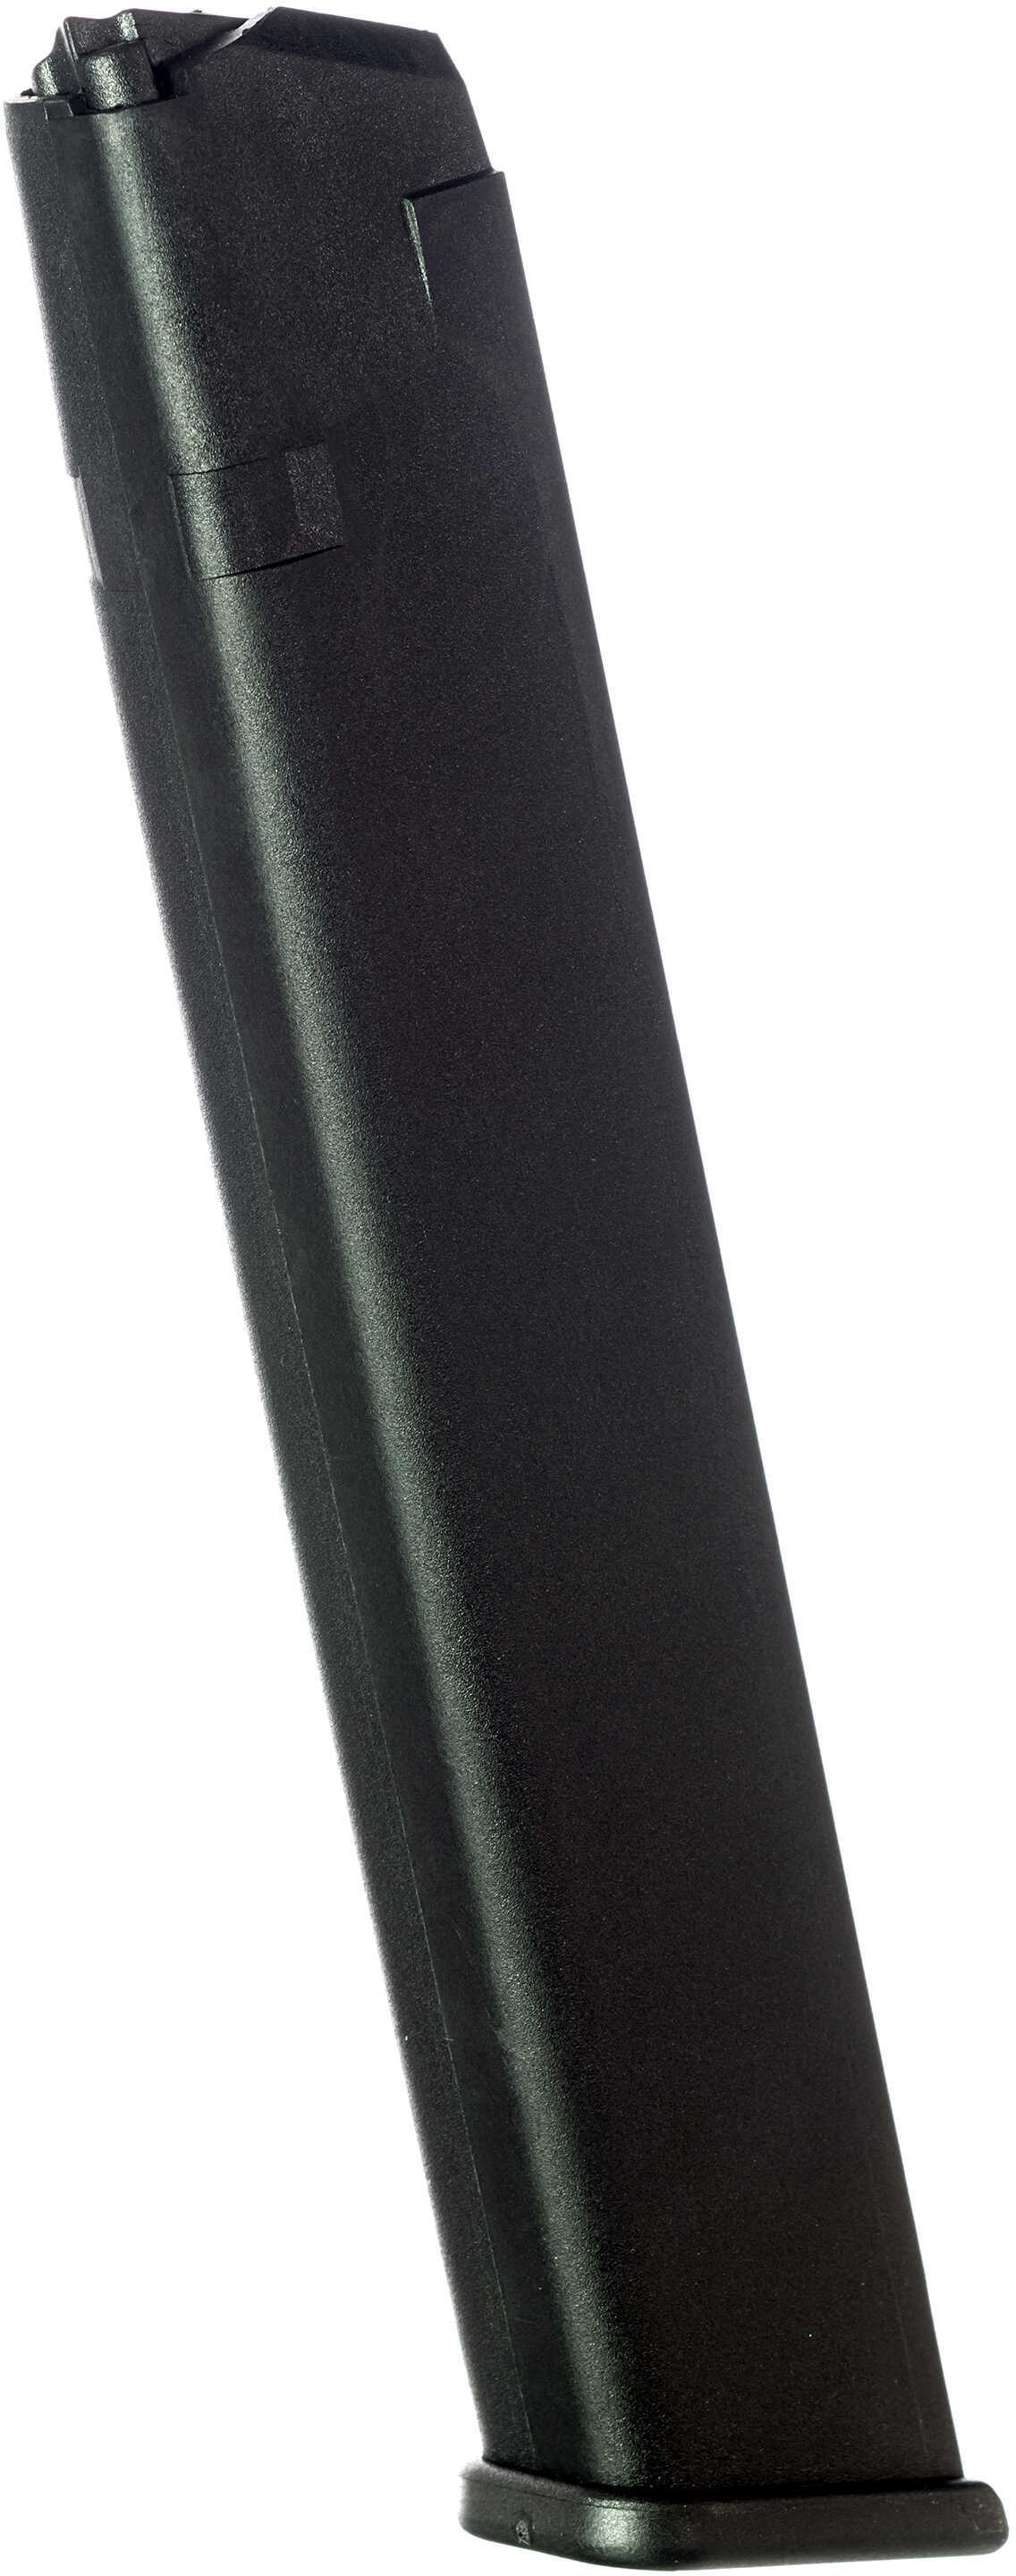 ProMag Mag for Glock 17 19 26 9MM 32Rd Blk Polymer